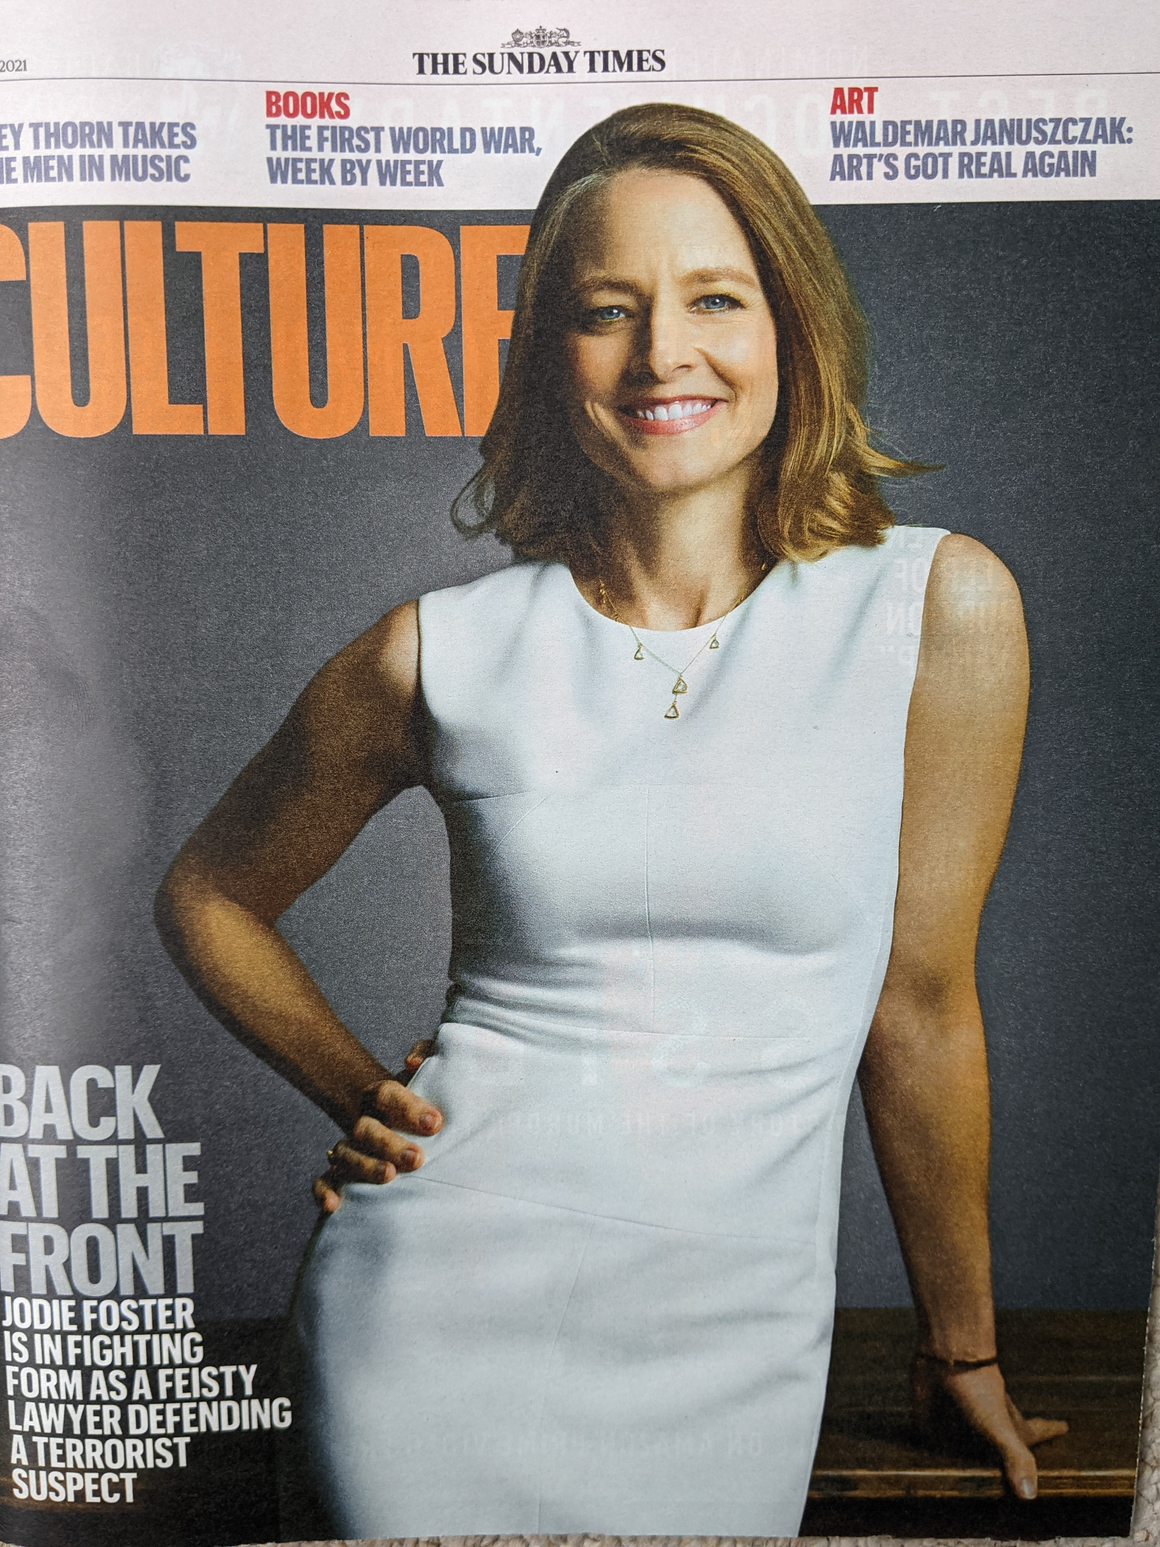 UK CULTURE Magazine March 2021: JODIE FOSTER COVER FEATURE Tracey Thorn